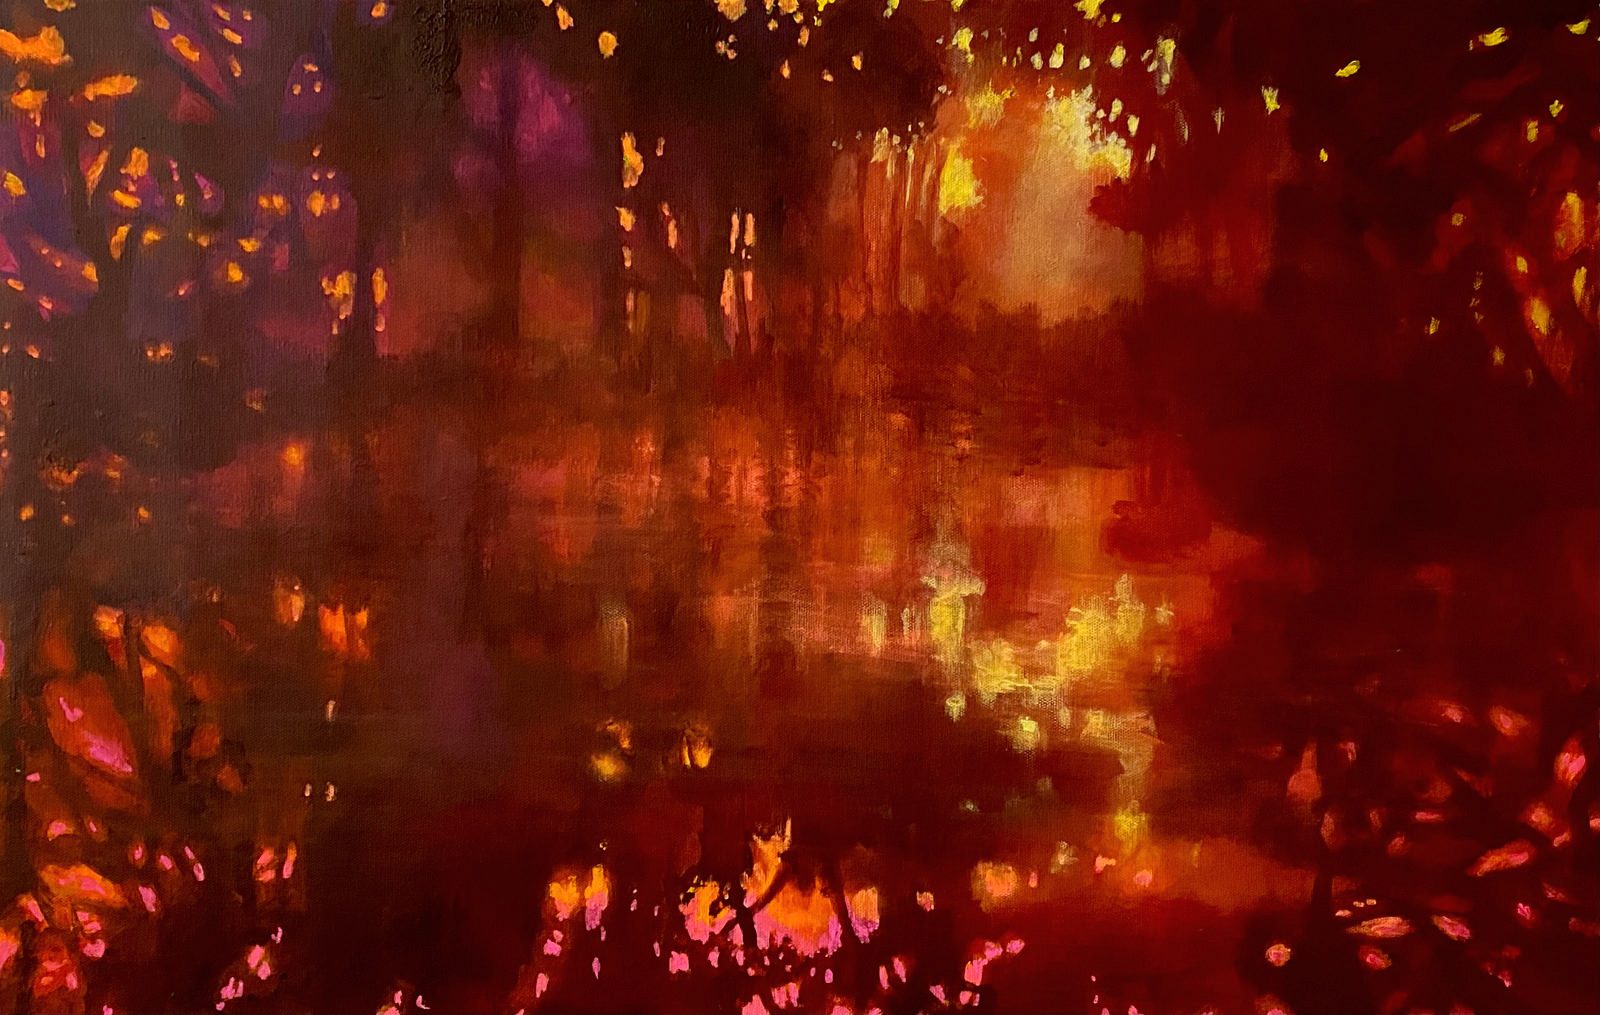 Clearing in the Wood V by John O'Grady | The Completed Artwork: Dappled light, Water reflections, a magical autumnal feel with warm oranges and reds